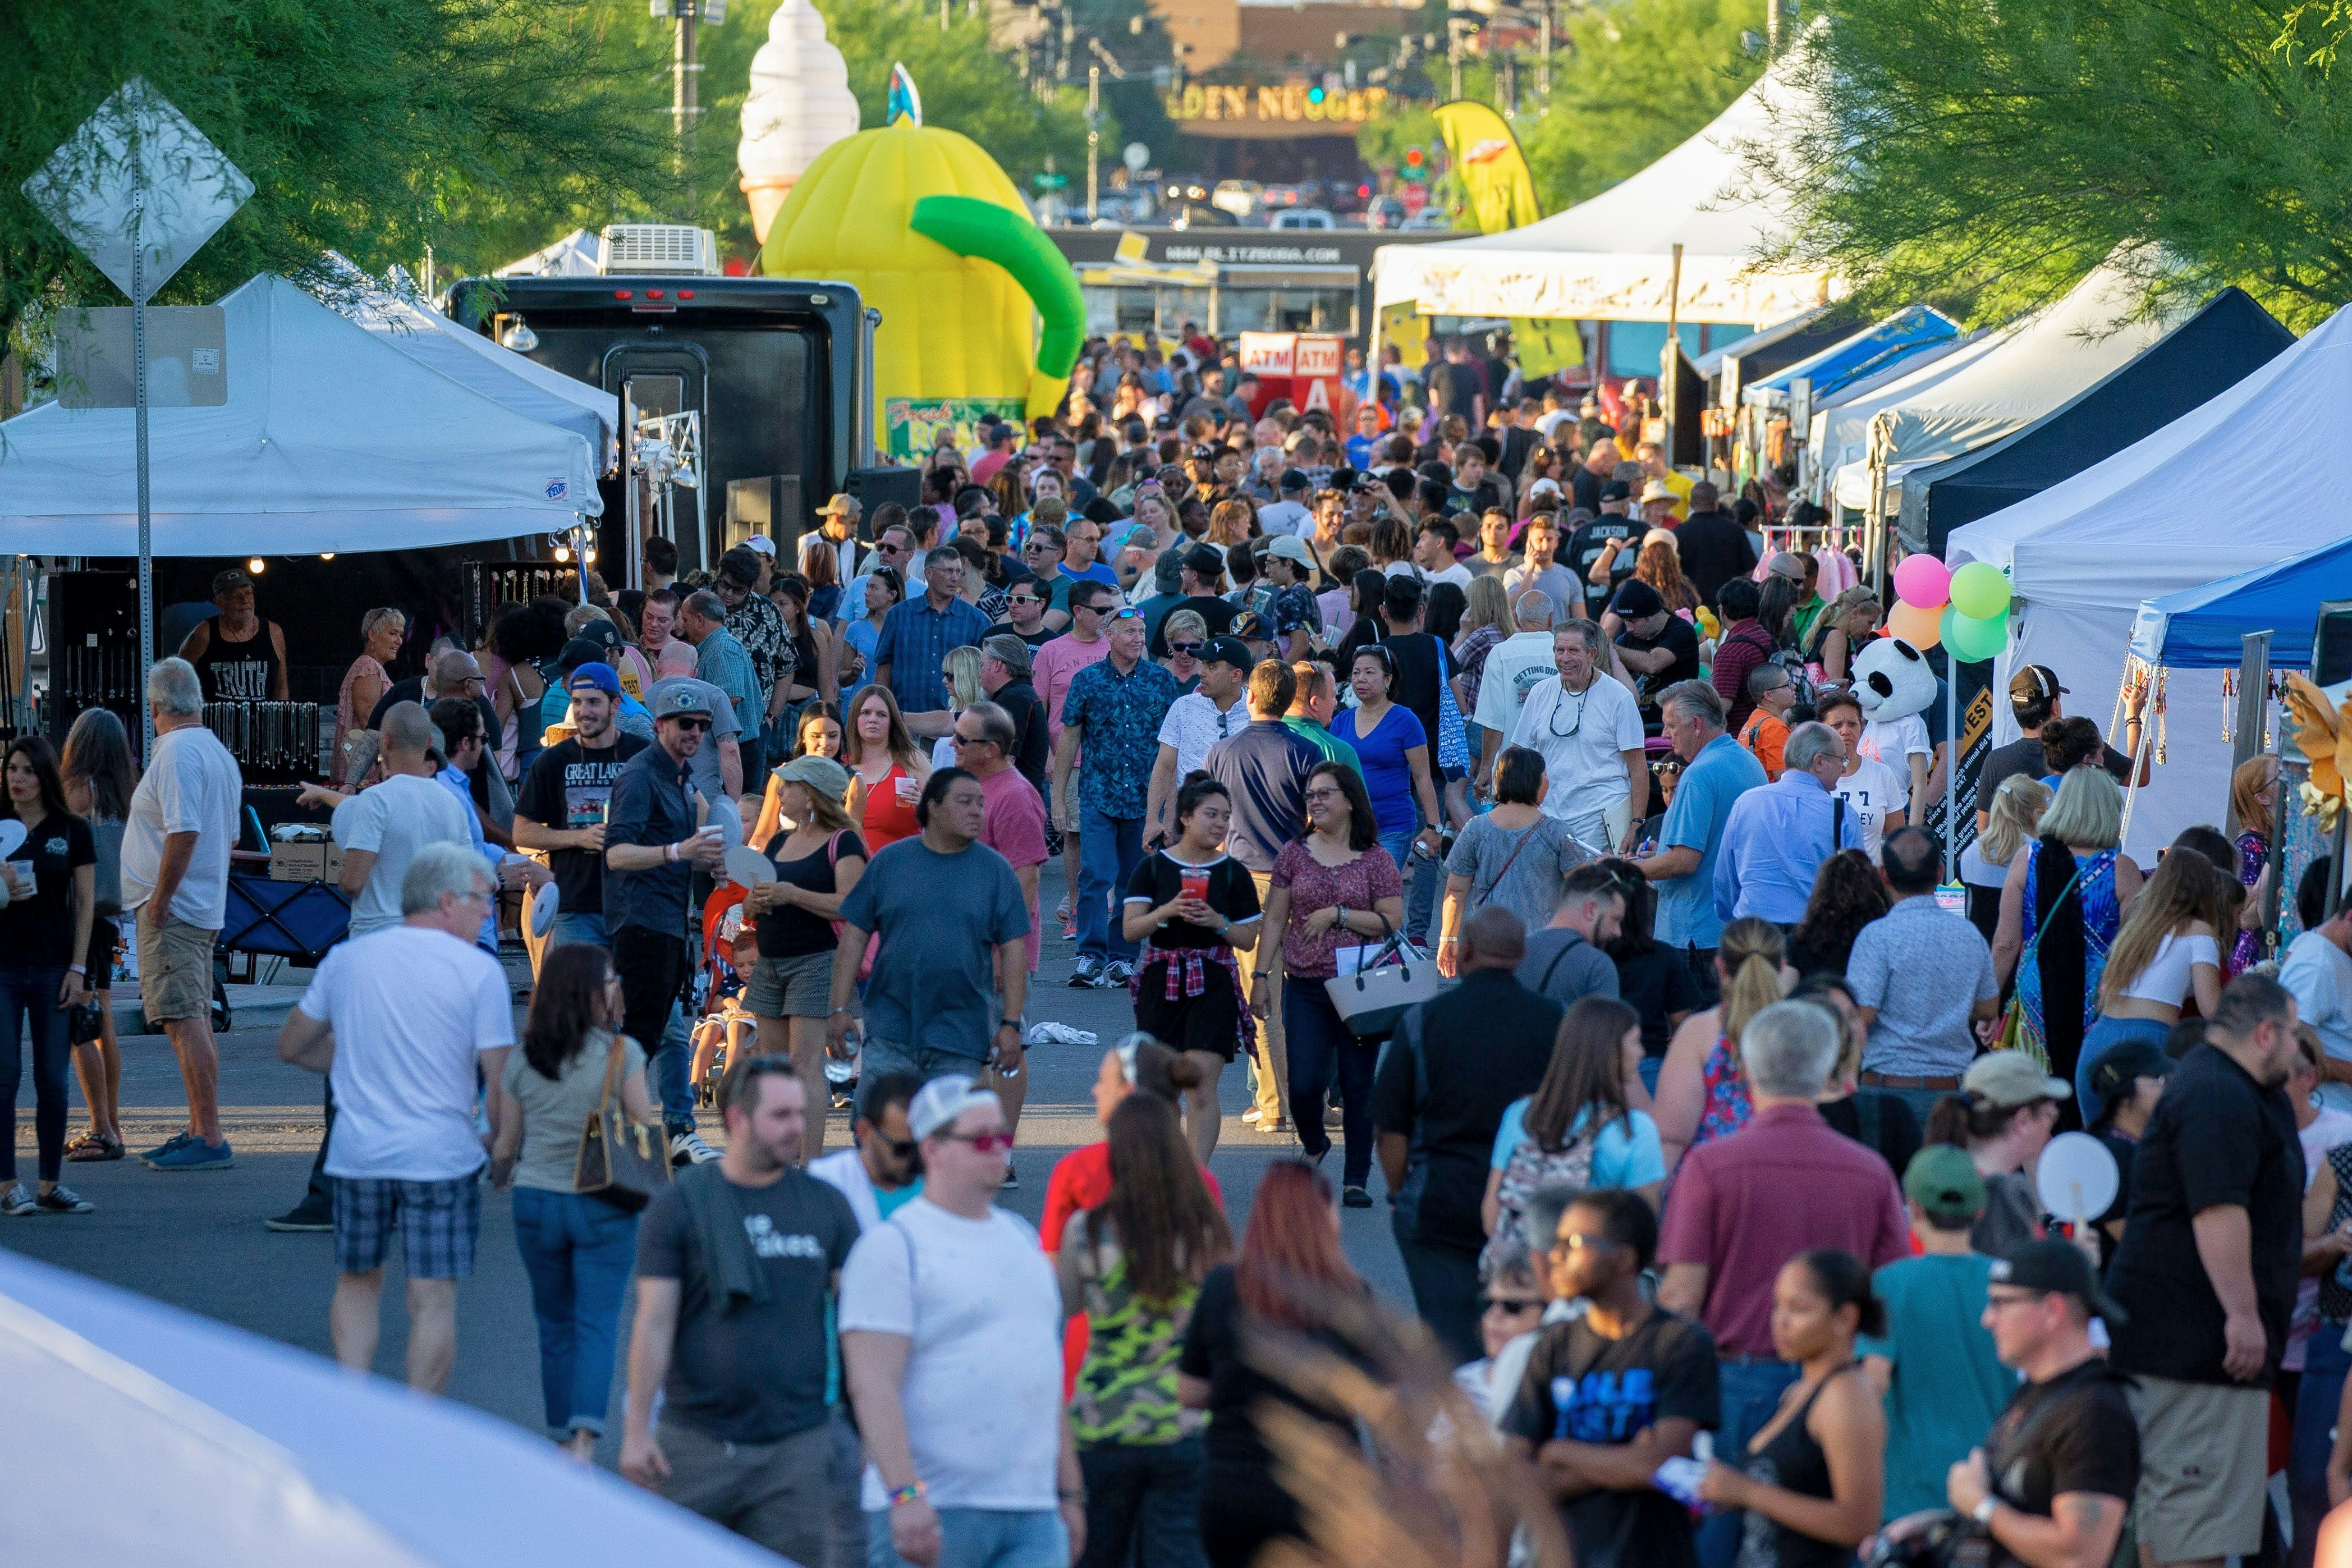 A large crowd fills a pedestrianized area lined with stalls at Las Vegas' First Friday Festival.